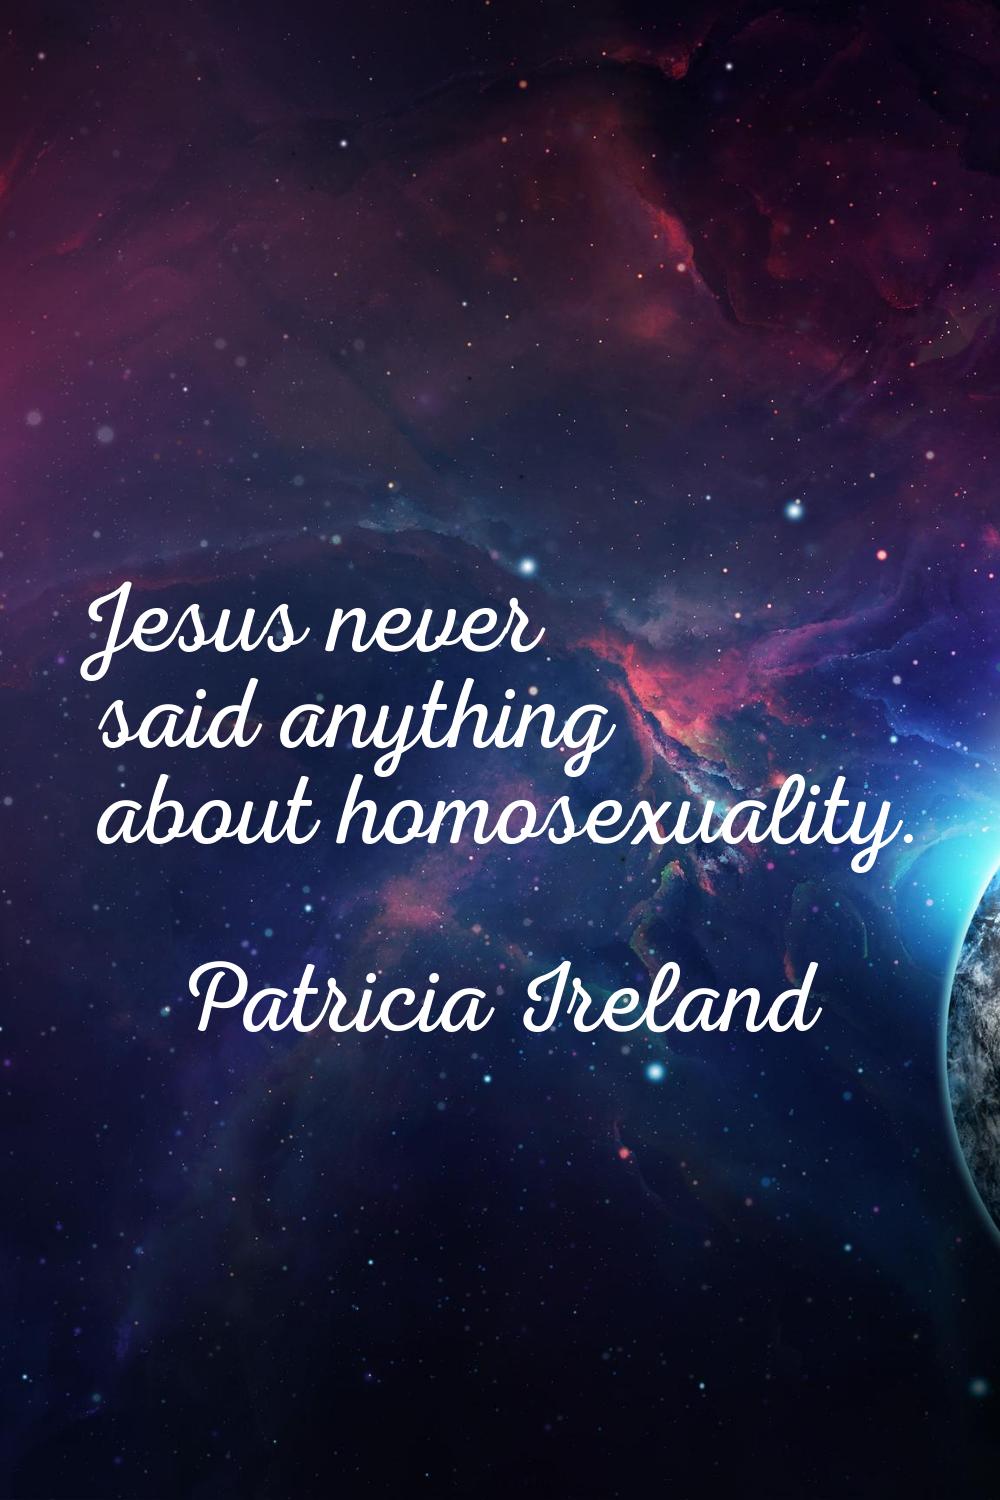 Jesus never said anything about homosexuality.